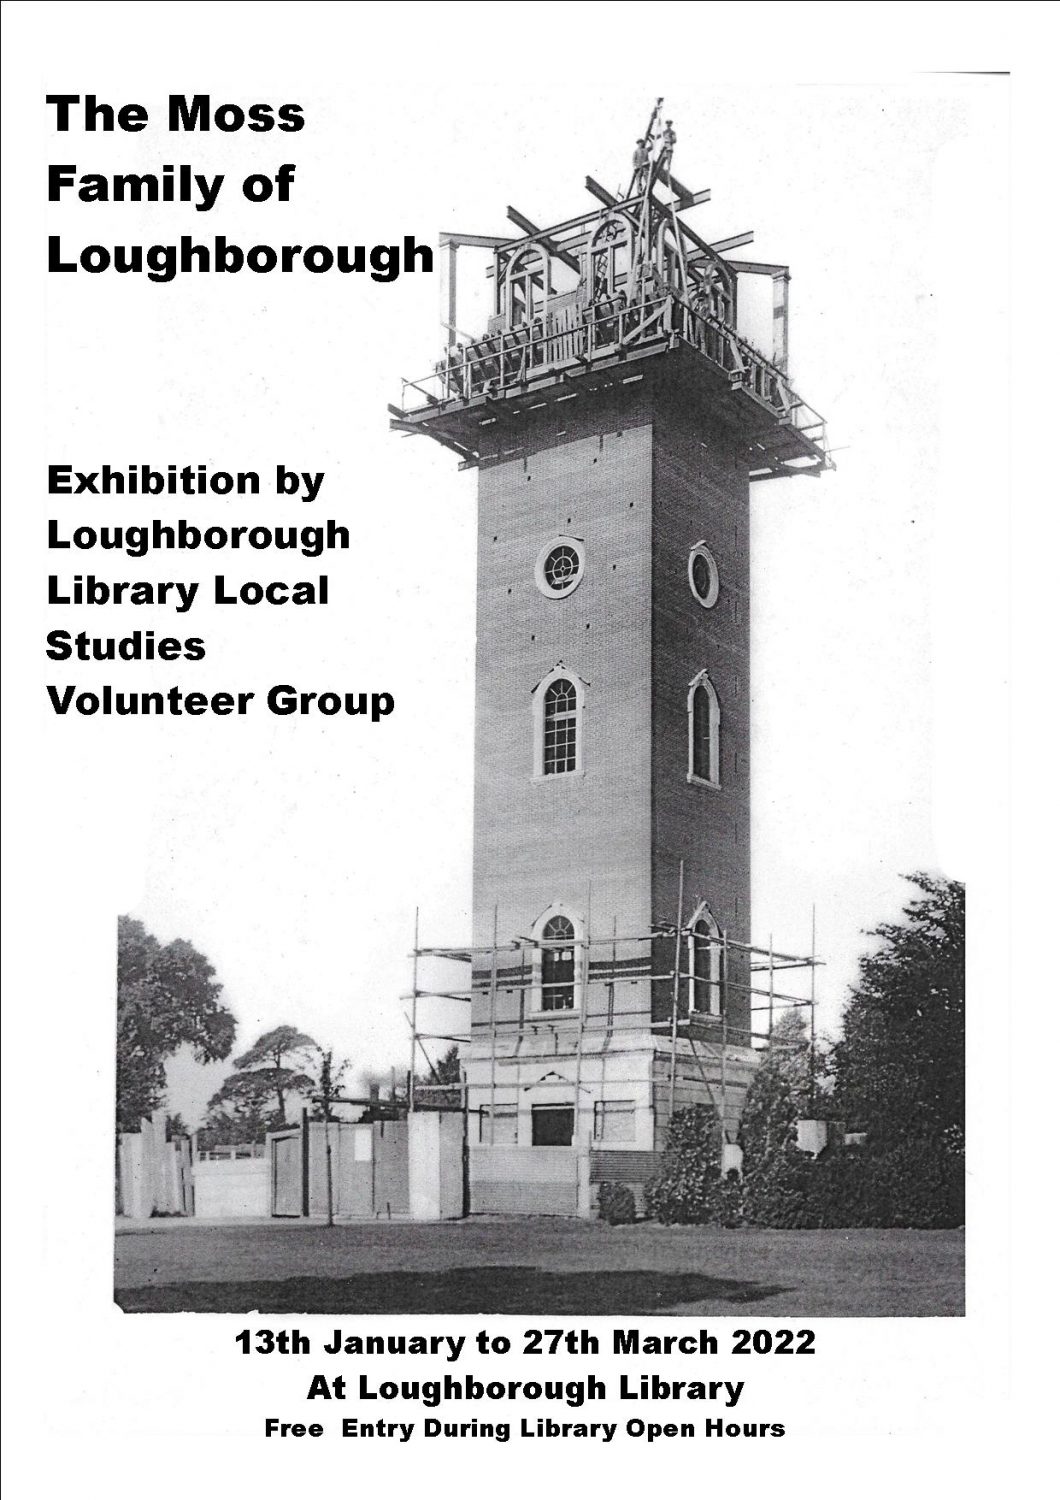 The Moss Family of Loughborough- New Exhibition